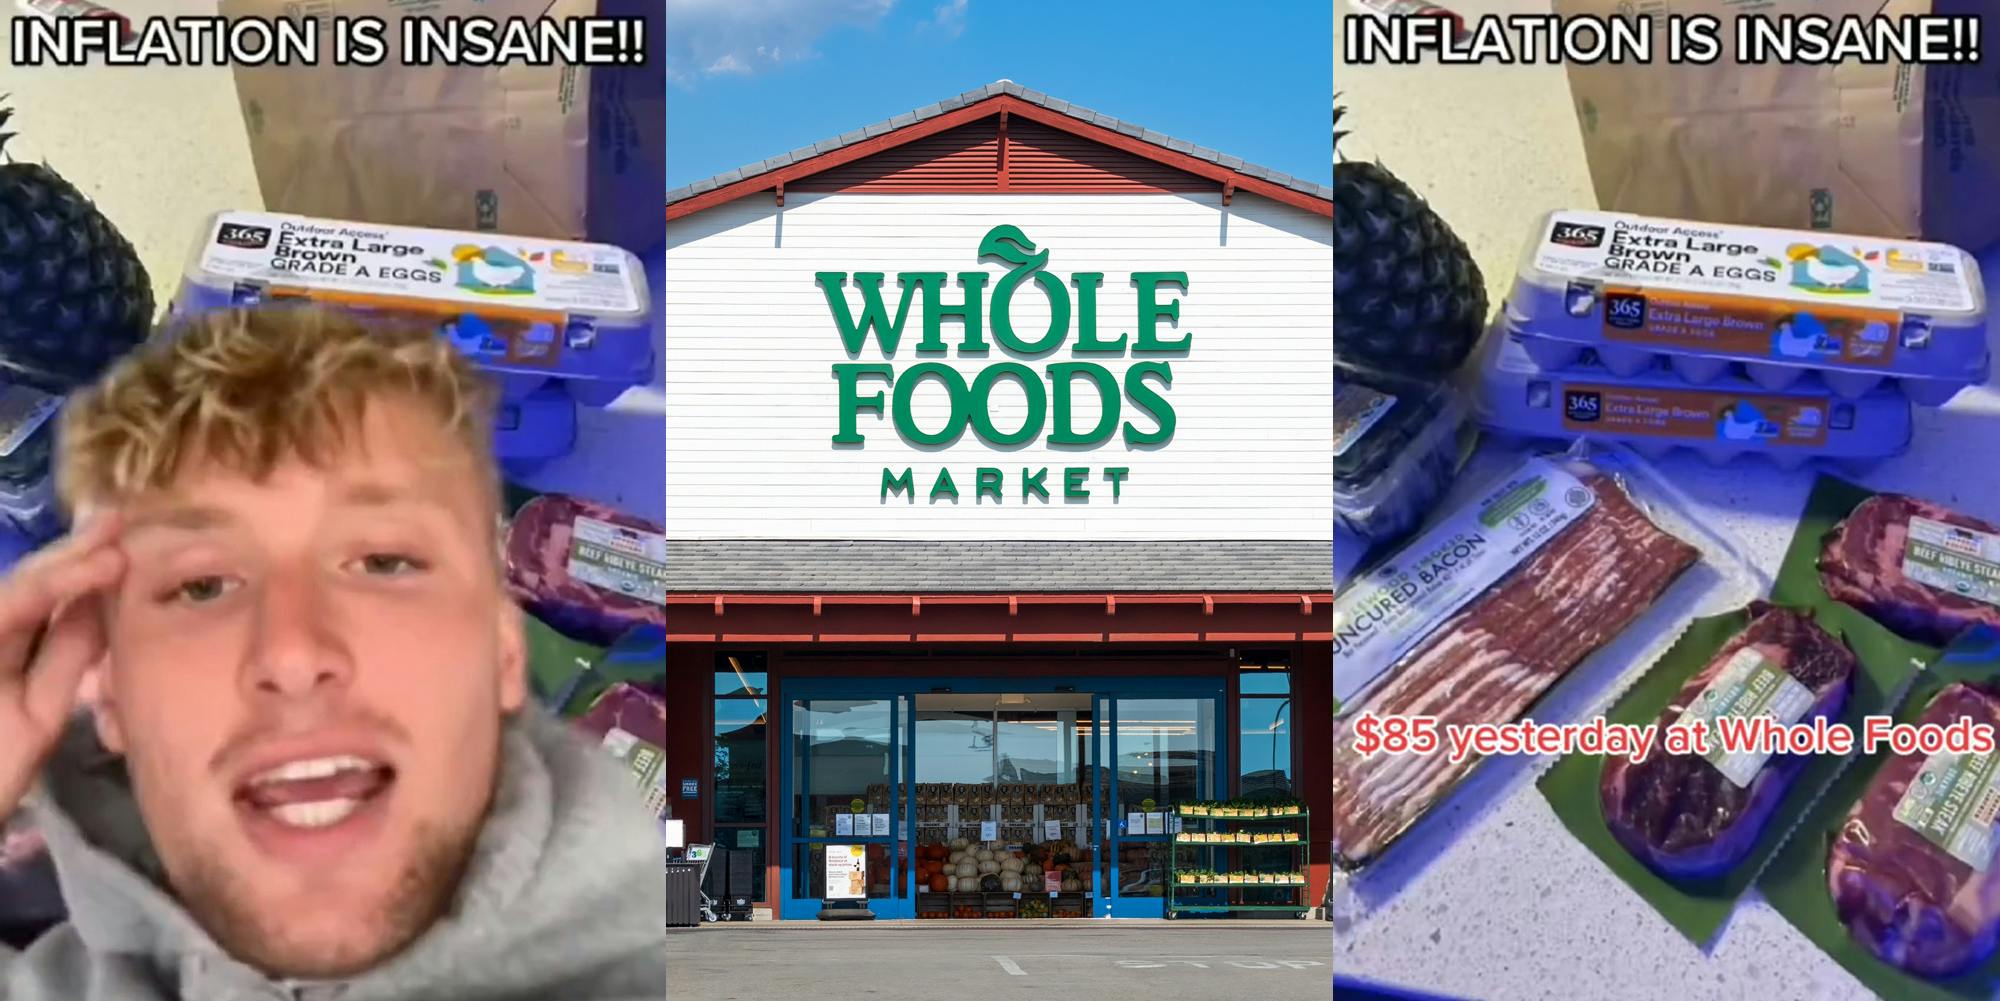 man greenscreen TikTok over image of groceries from Whole Foods with caption "INFLATION IS INSANE!!" (l) Whole Foods Market building with sign (c) image of groceries from Whole Foods with caption "INFLATION IS INSANE!!" "$85 yesterday at Whole Foods" (r)